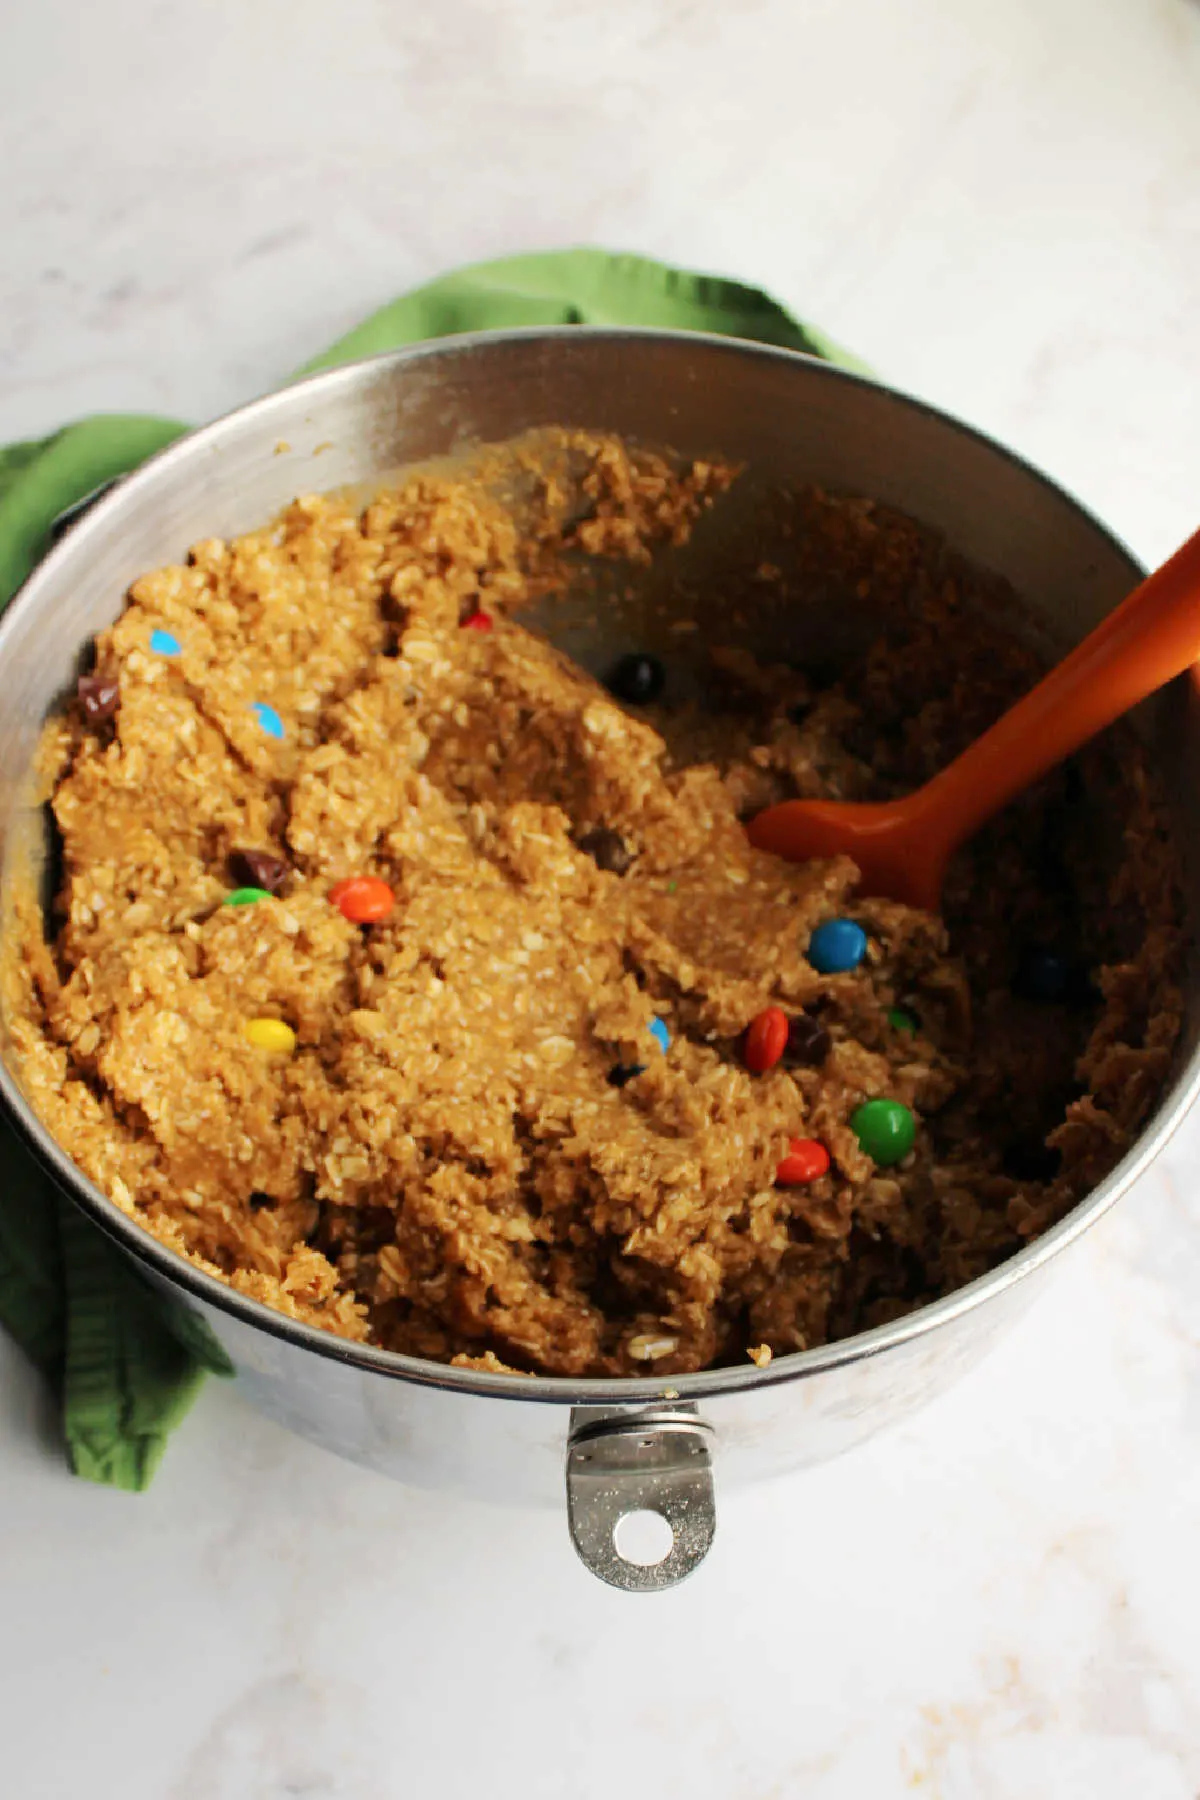 Large mixing bowl filled with peanut butter and oatmeal cookie dough.